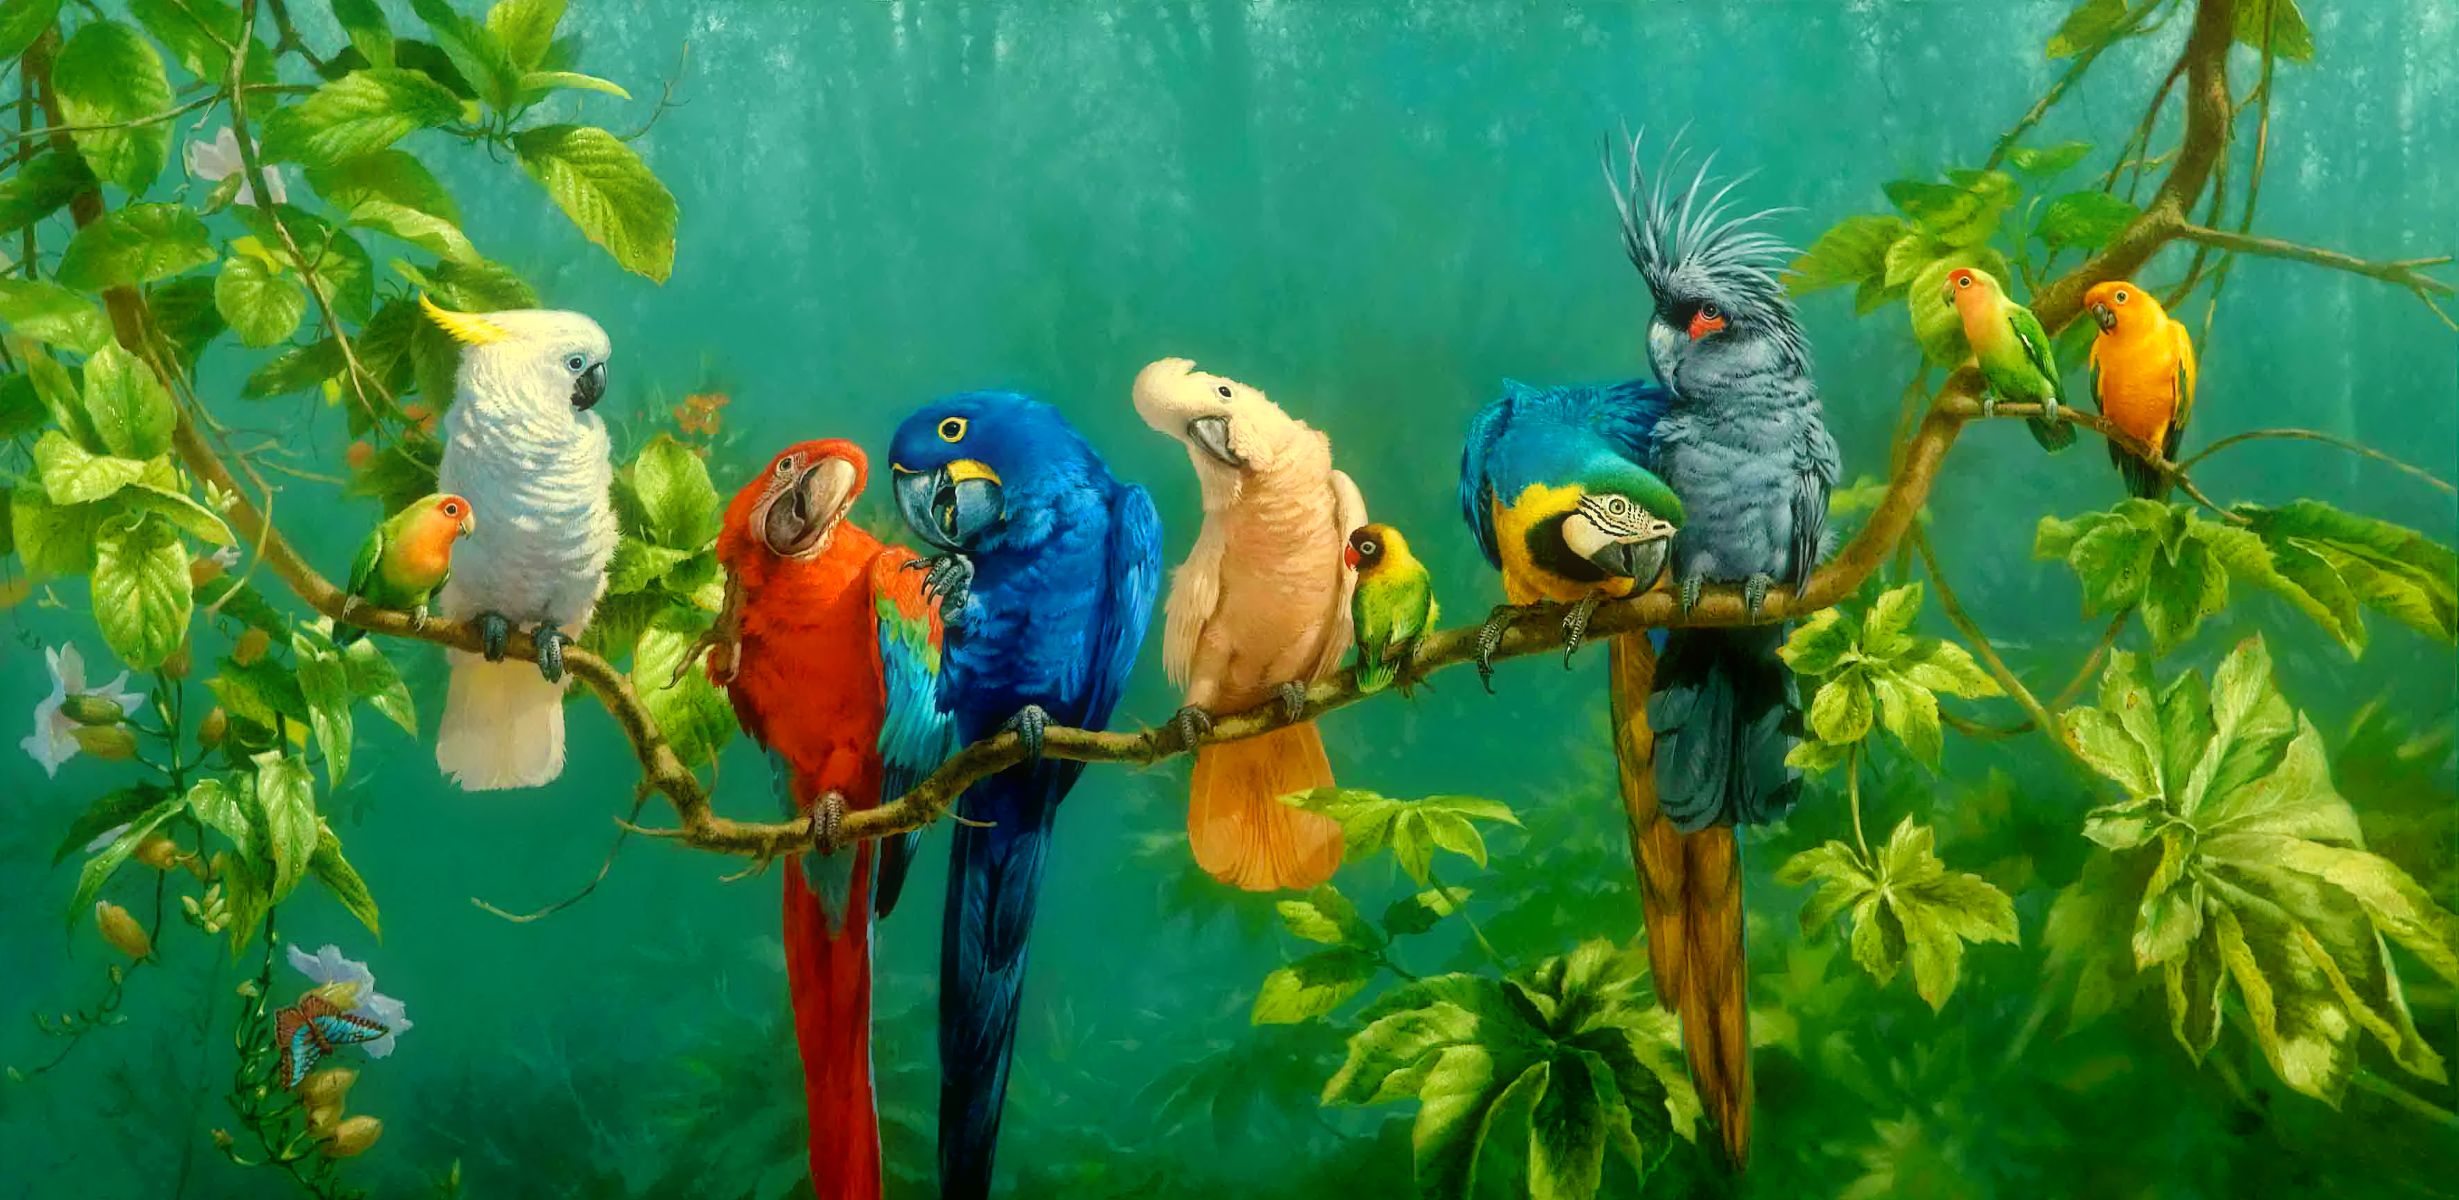 branch, tropical, animal, bird, leaf, birds, macaw, colorful, parrot, cockatoo, colors